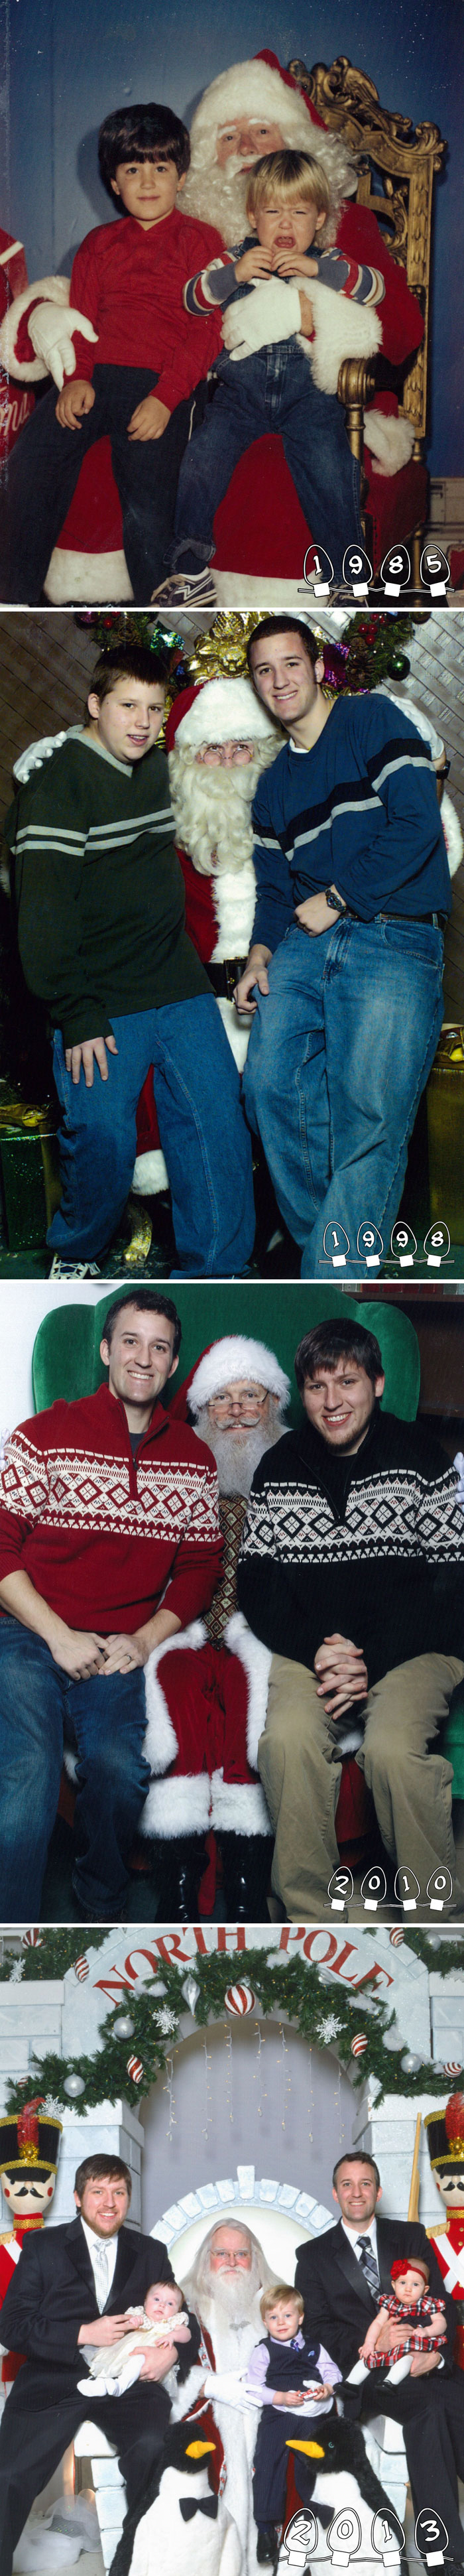 34 Years Photos With Santa - Annual Tradition